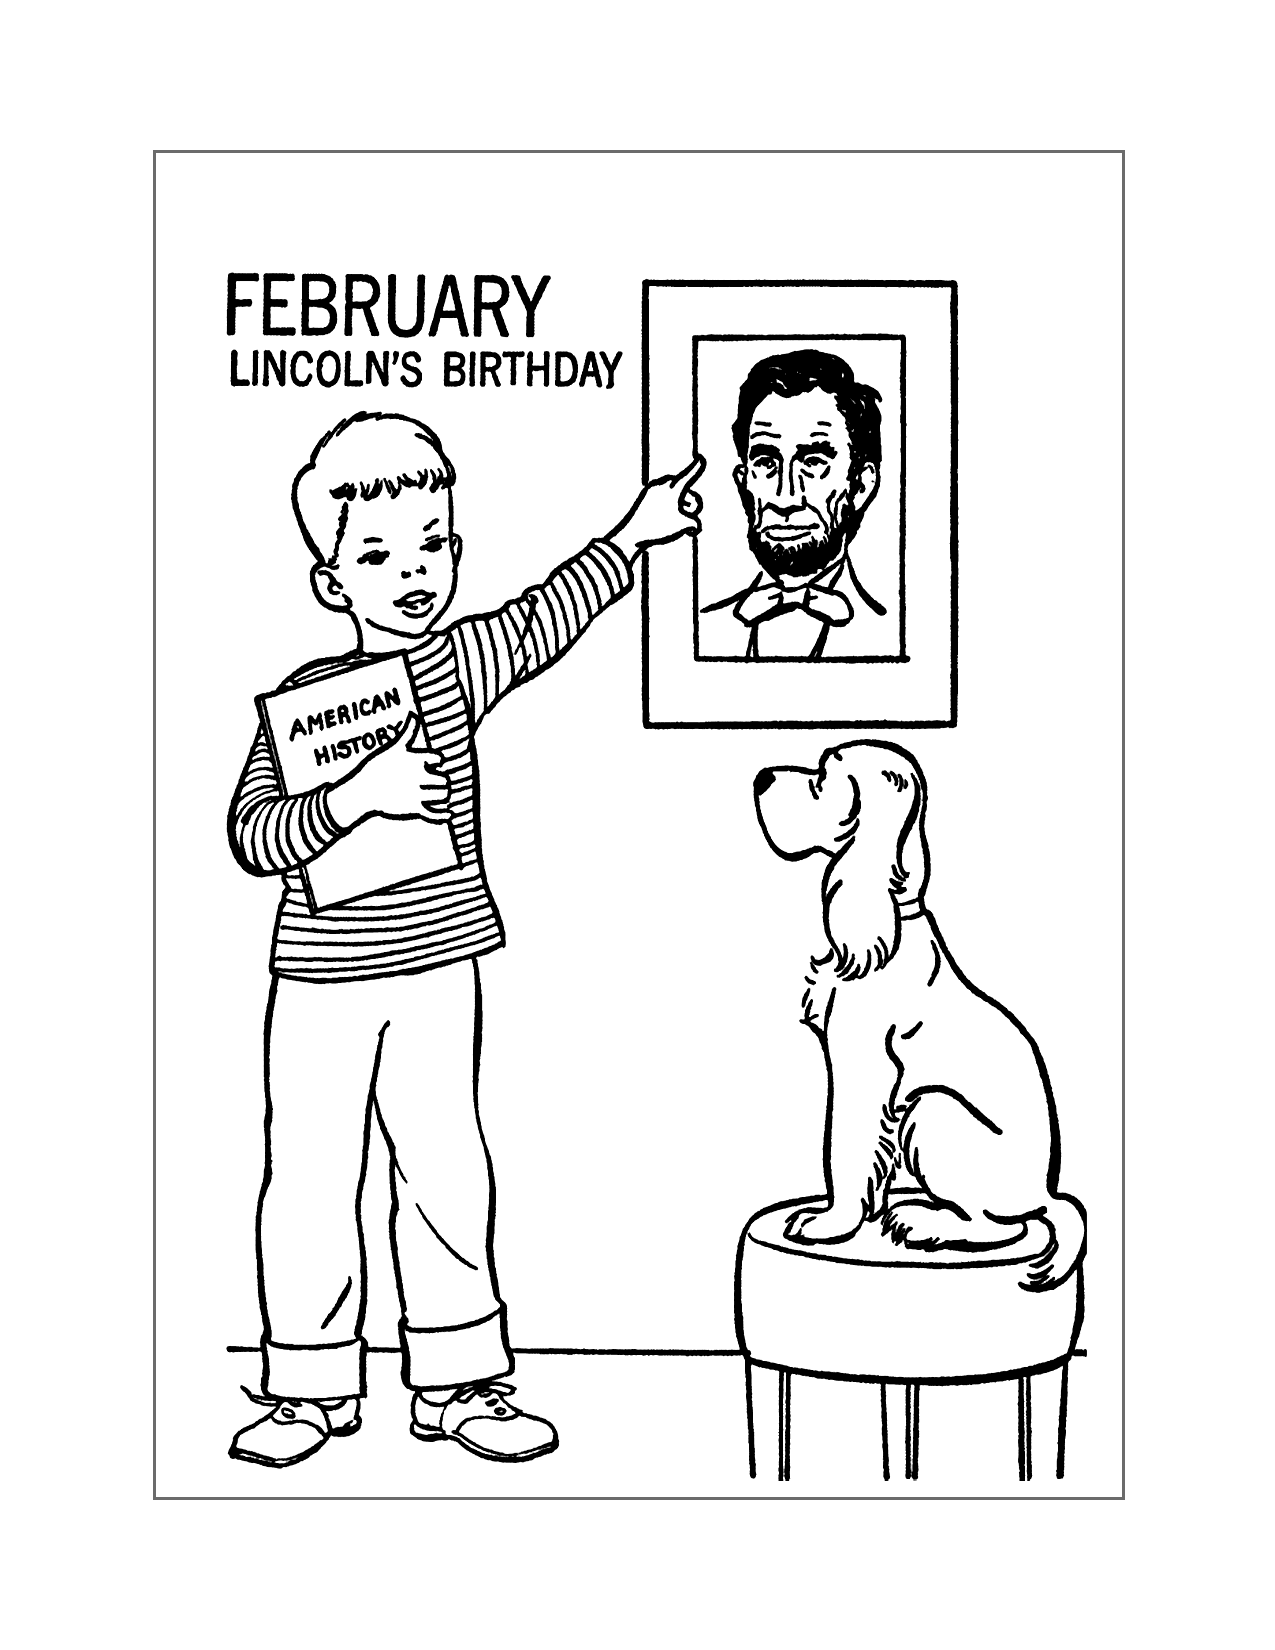 Lincolns Birthday In February Coloring Sheet